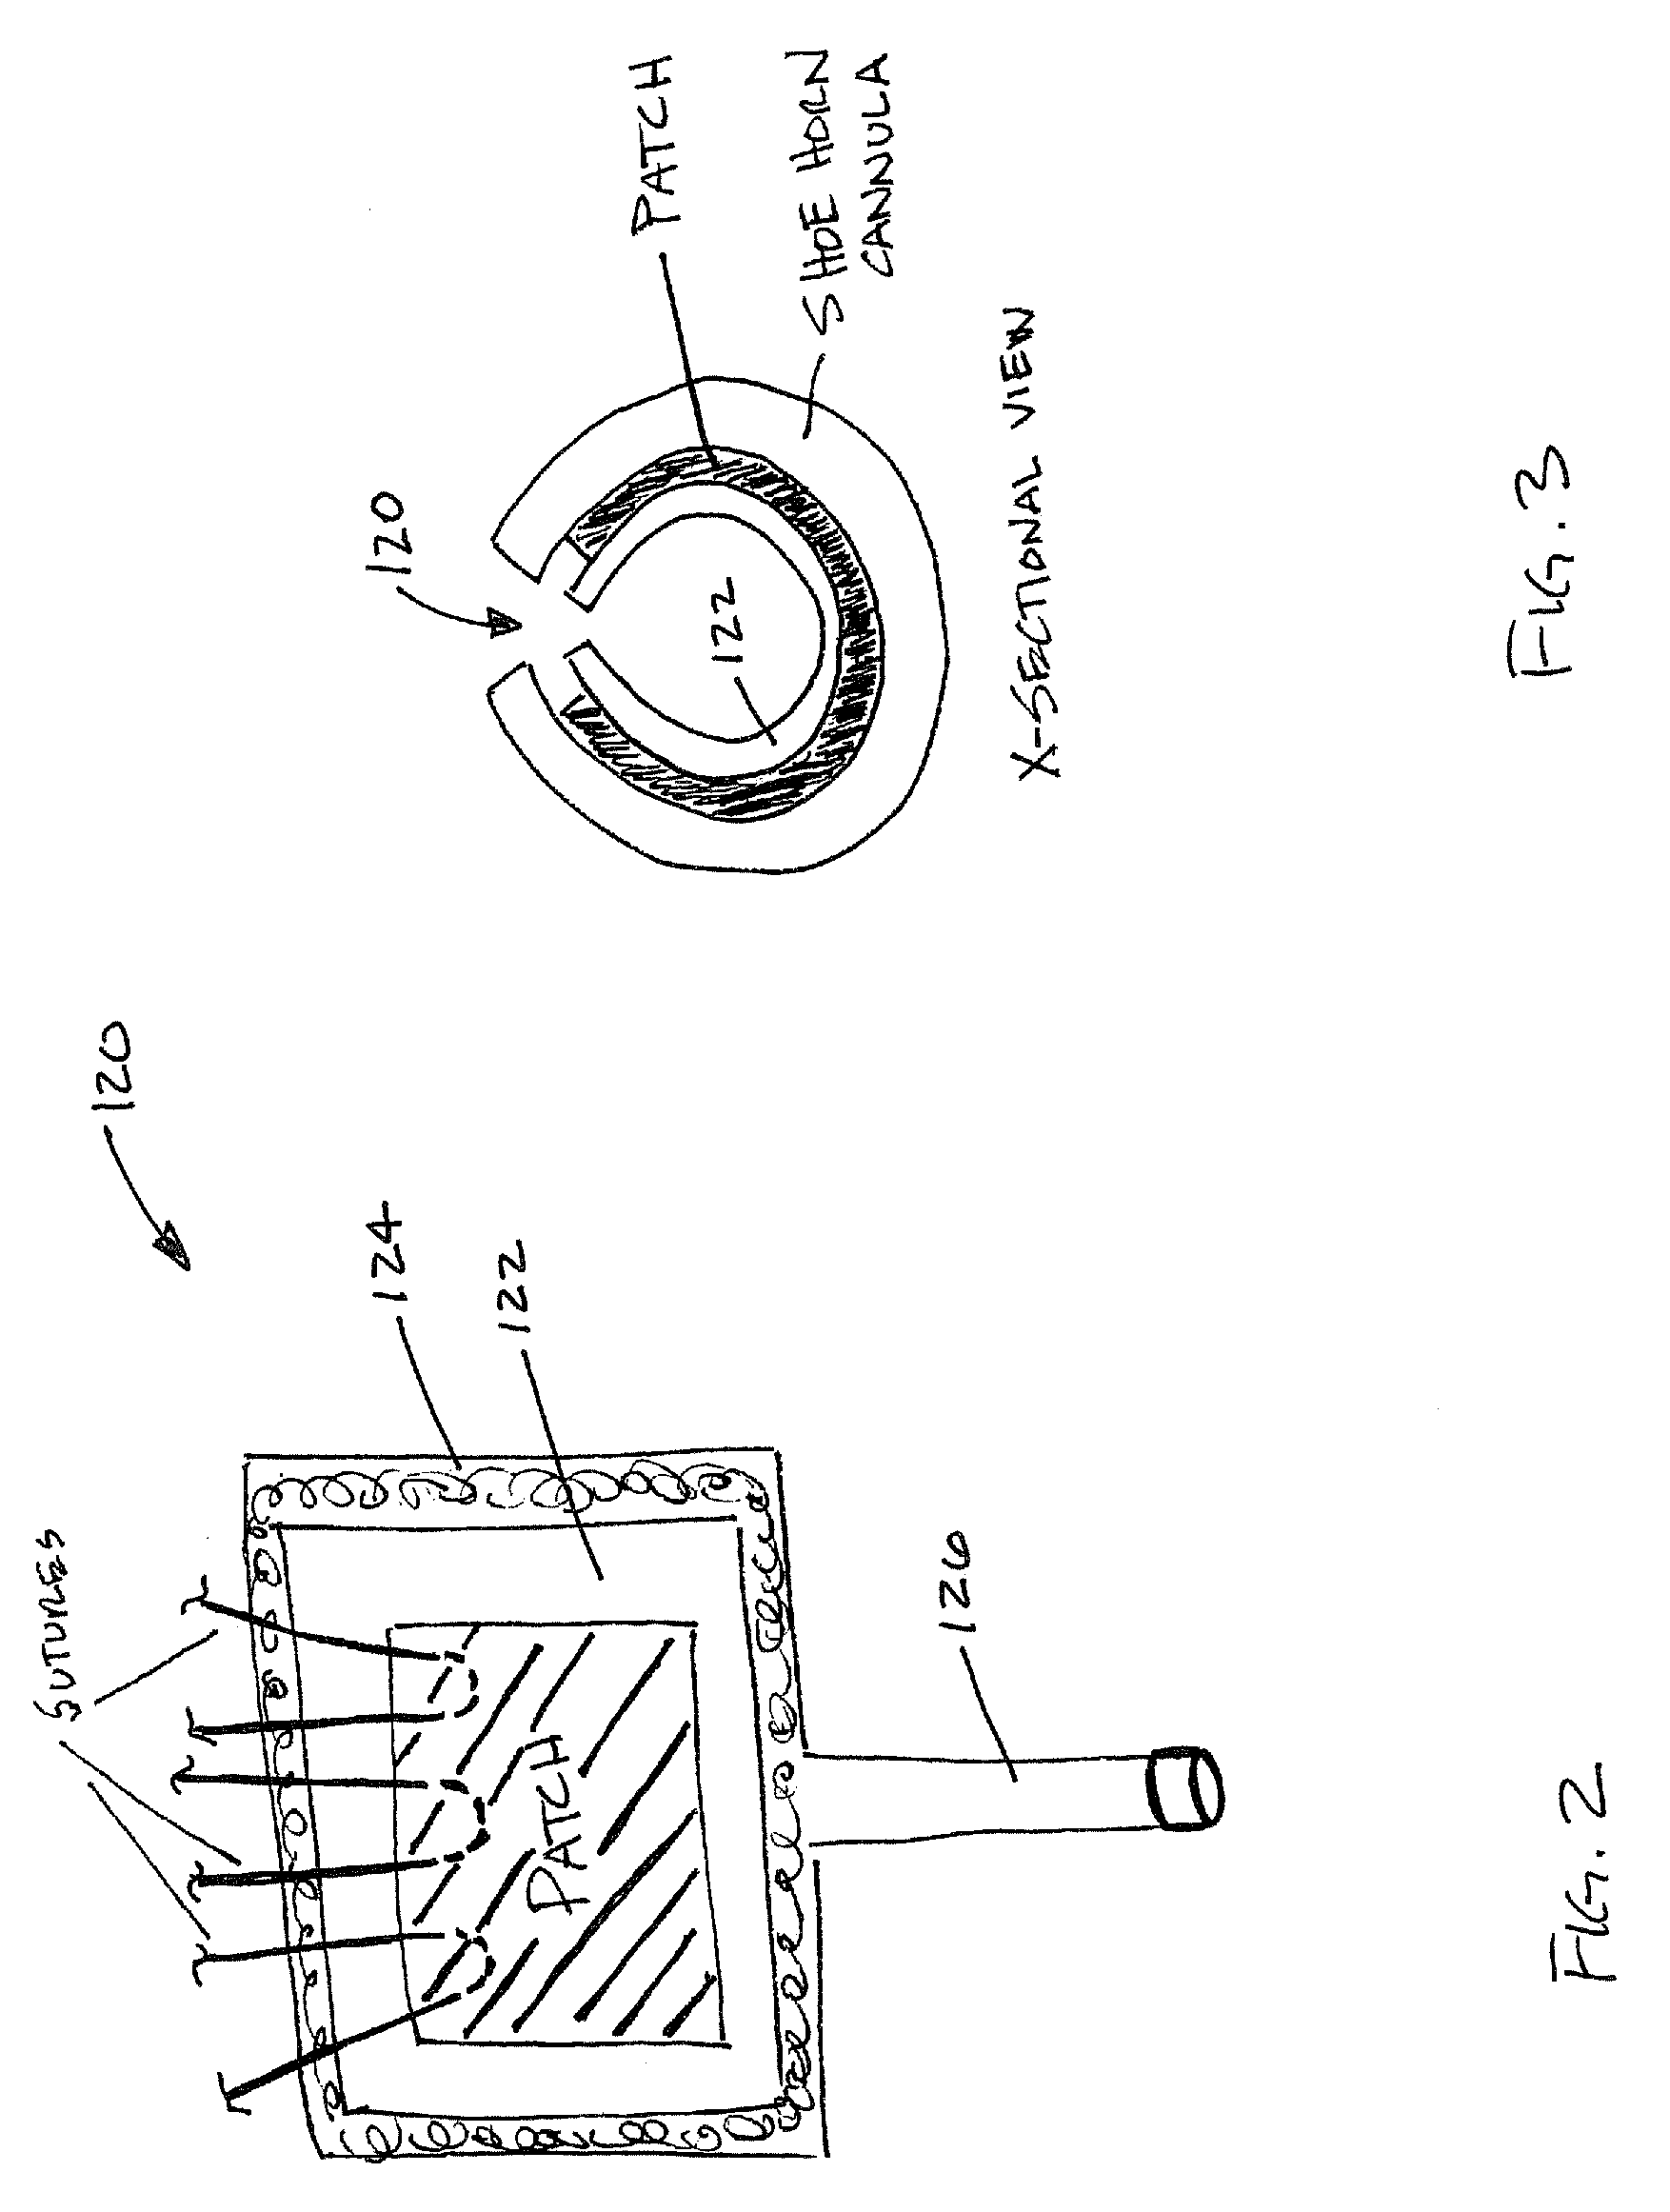 Rotator cuff patch delivery device